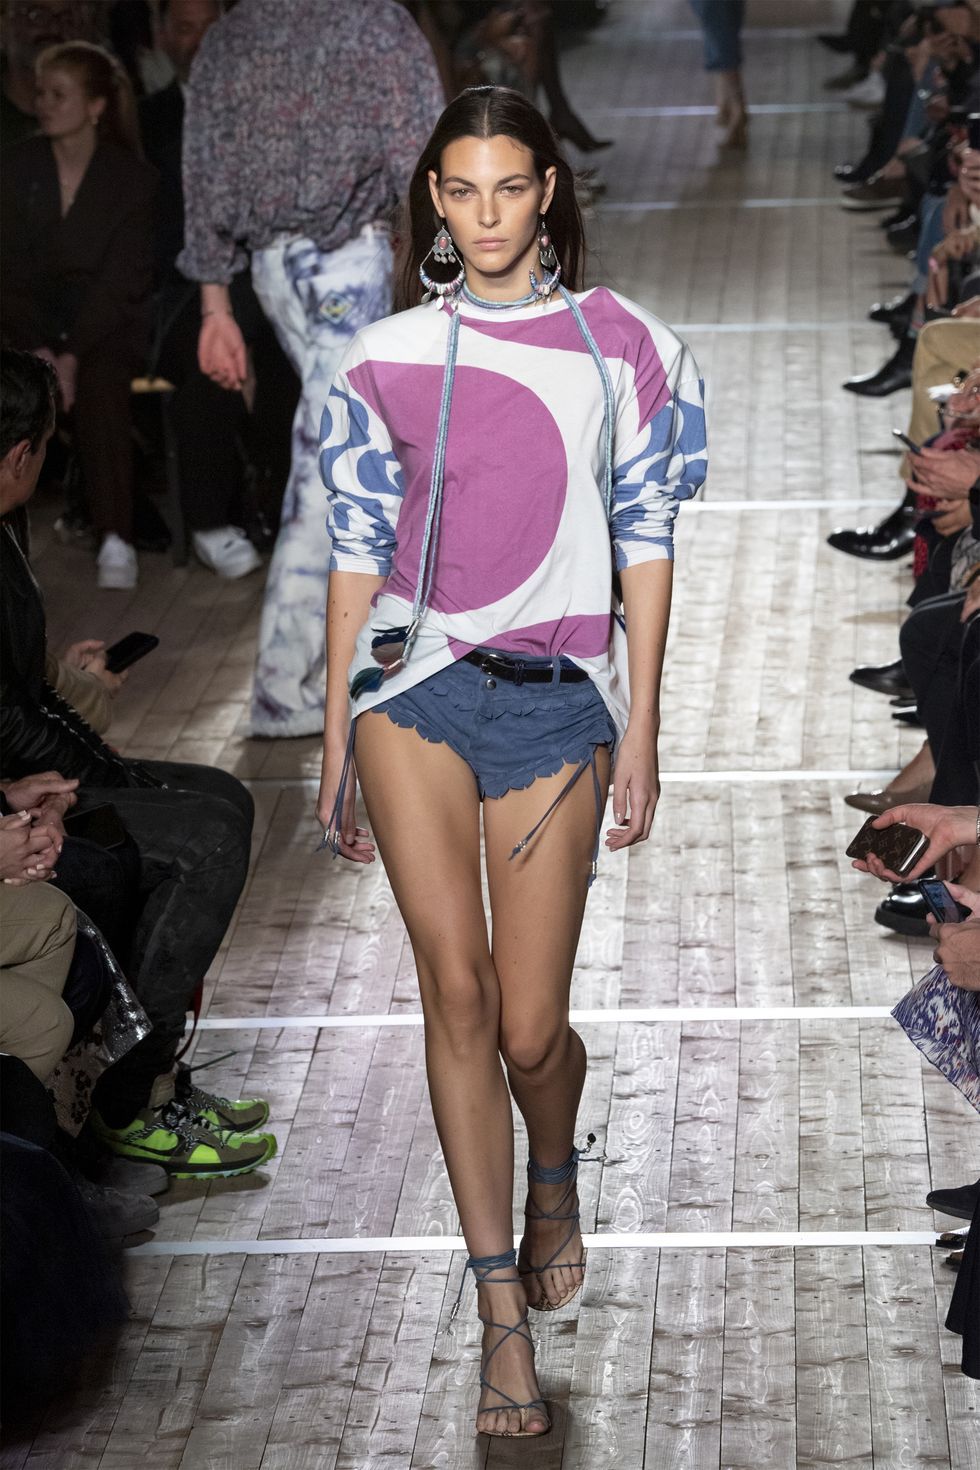 Top 10 Trends From The Spring 2020 Fashion Shows